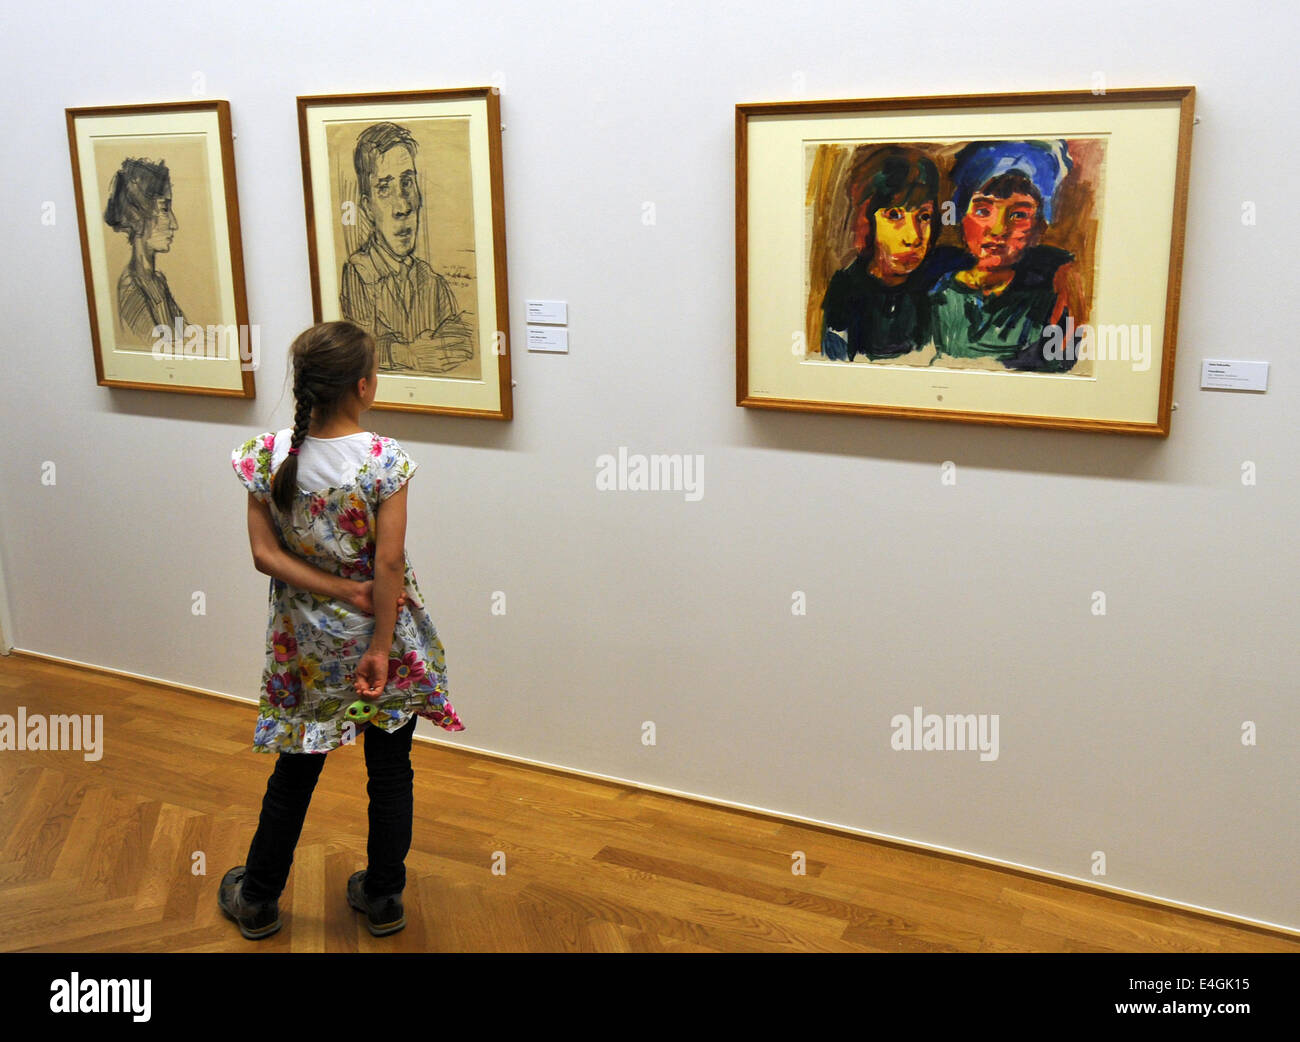 A girl looks at drawings and paintings by Oskar Kokoschka (1886-1980) at the Galerie Neue Meister (lit. New Masters Gallery) in Dresden, Germany, 10 July 2014. The Gallery purchased the painting for 2,6 million Euro from a private owner. Photo: MATTHIAS HIEKEL/dpa Stock Photo